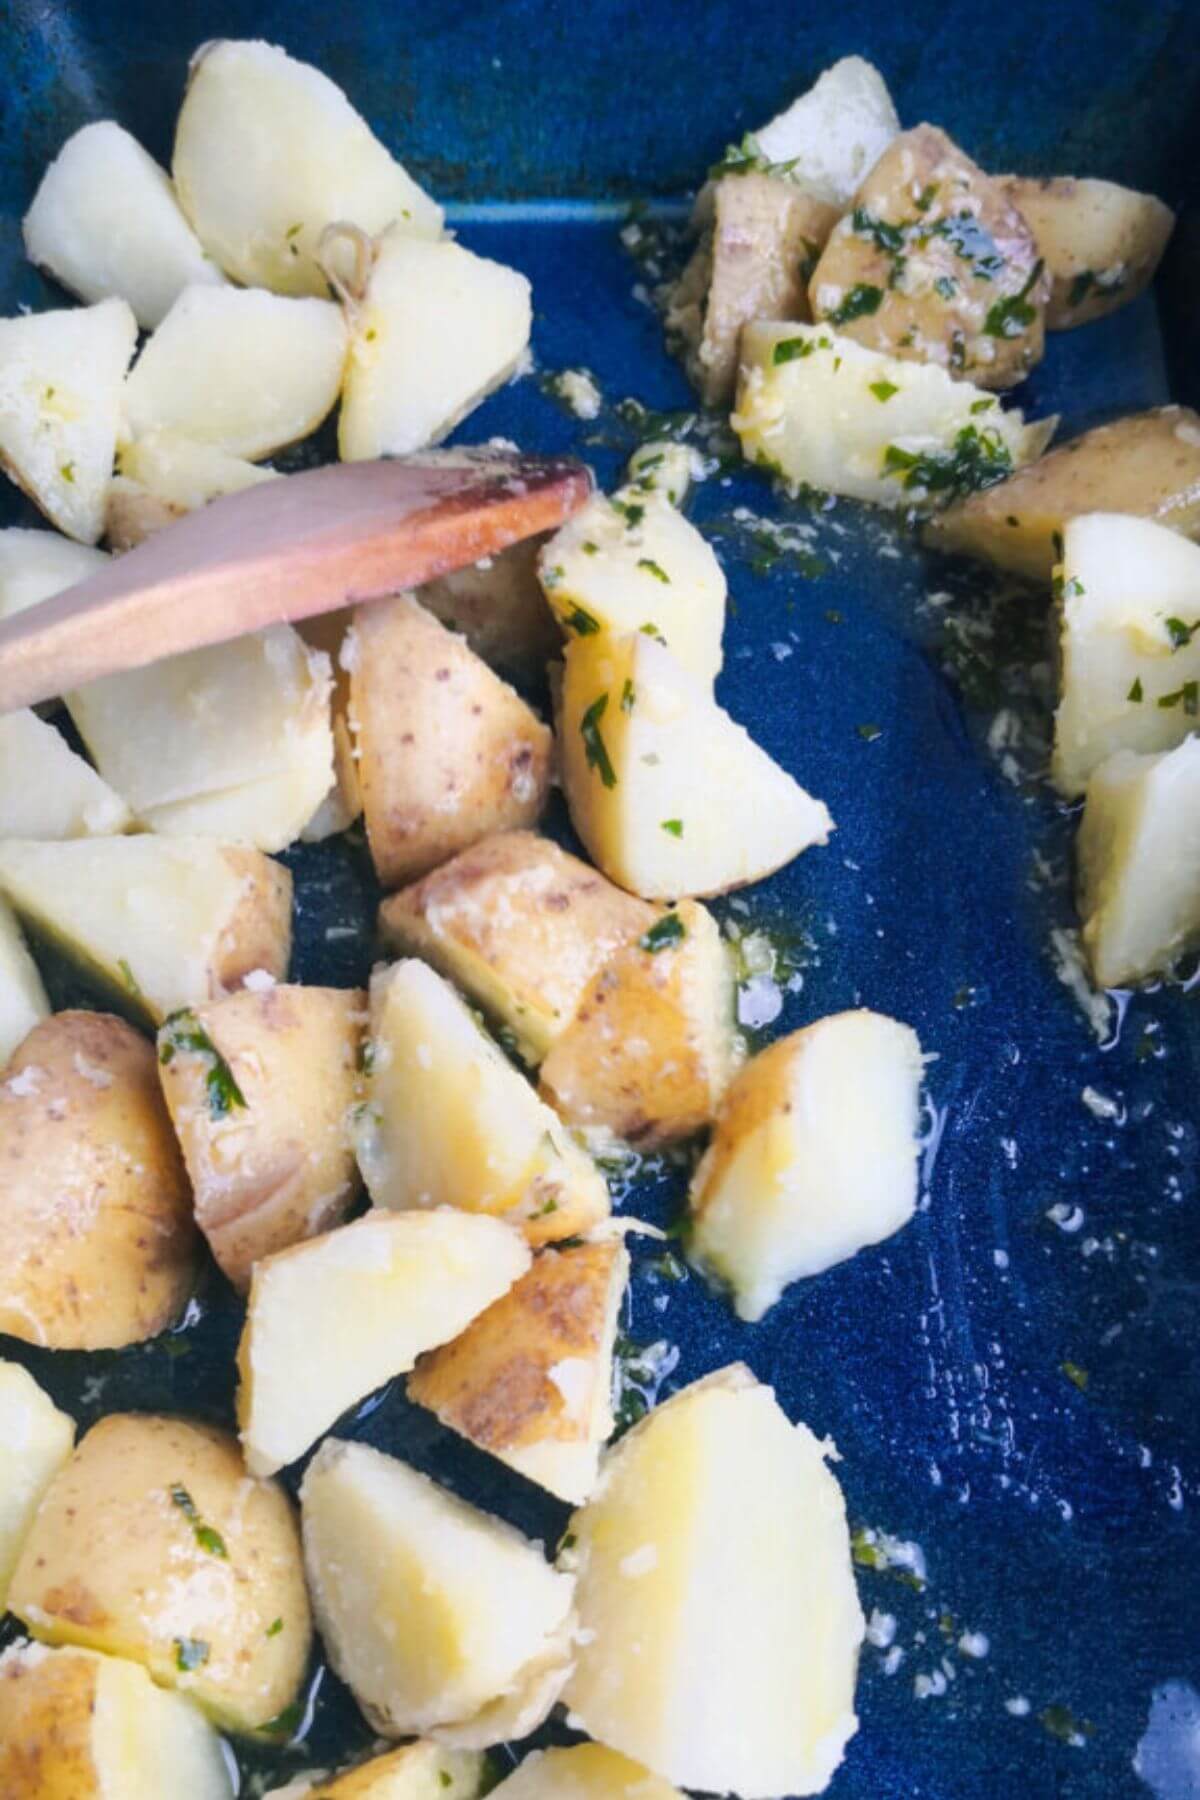 Garlic butter sauce being mixed through potato chunks in a large blue oven dish with a wooden spoon.